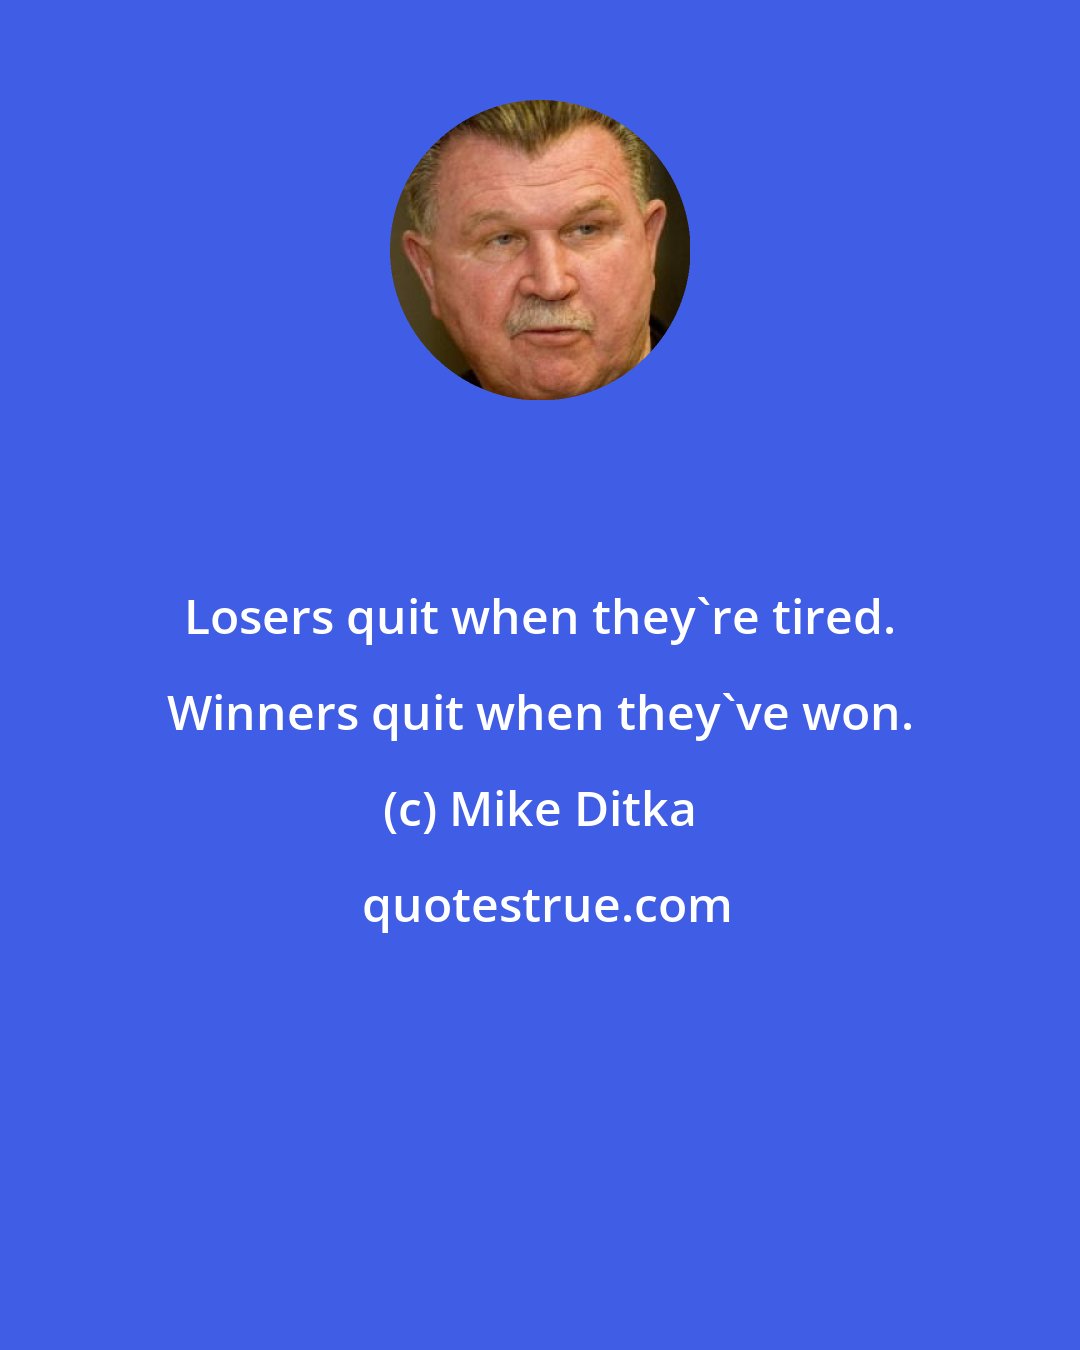 Mike Ditka: Losers quit when they're tired. Winners quit when they've won.